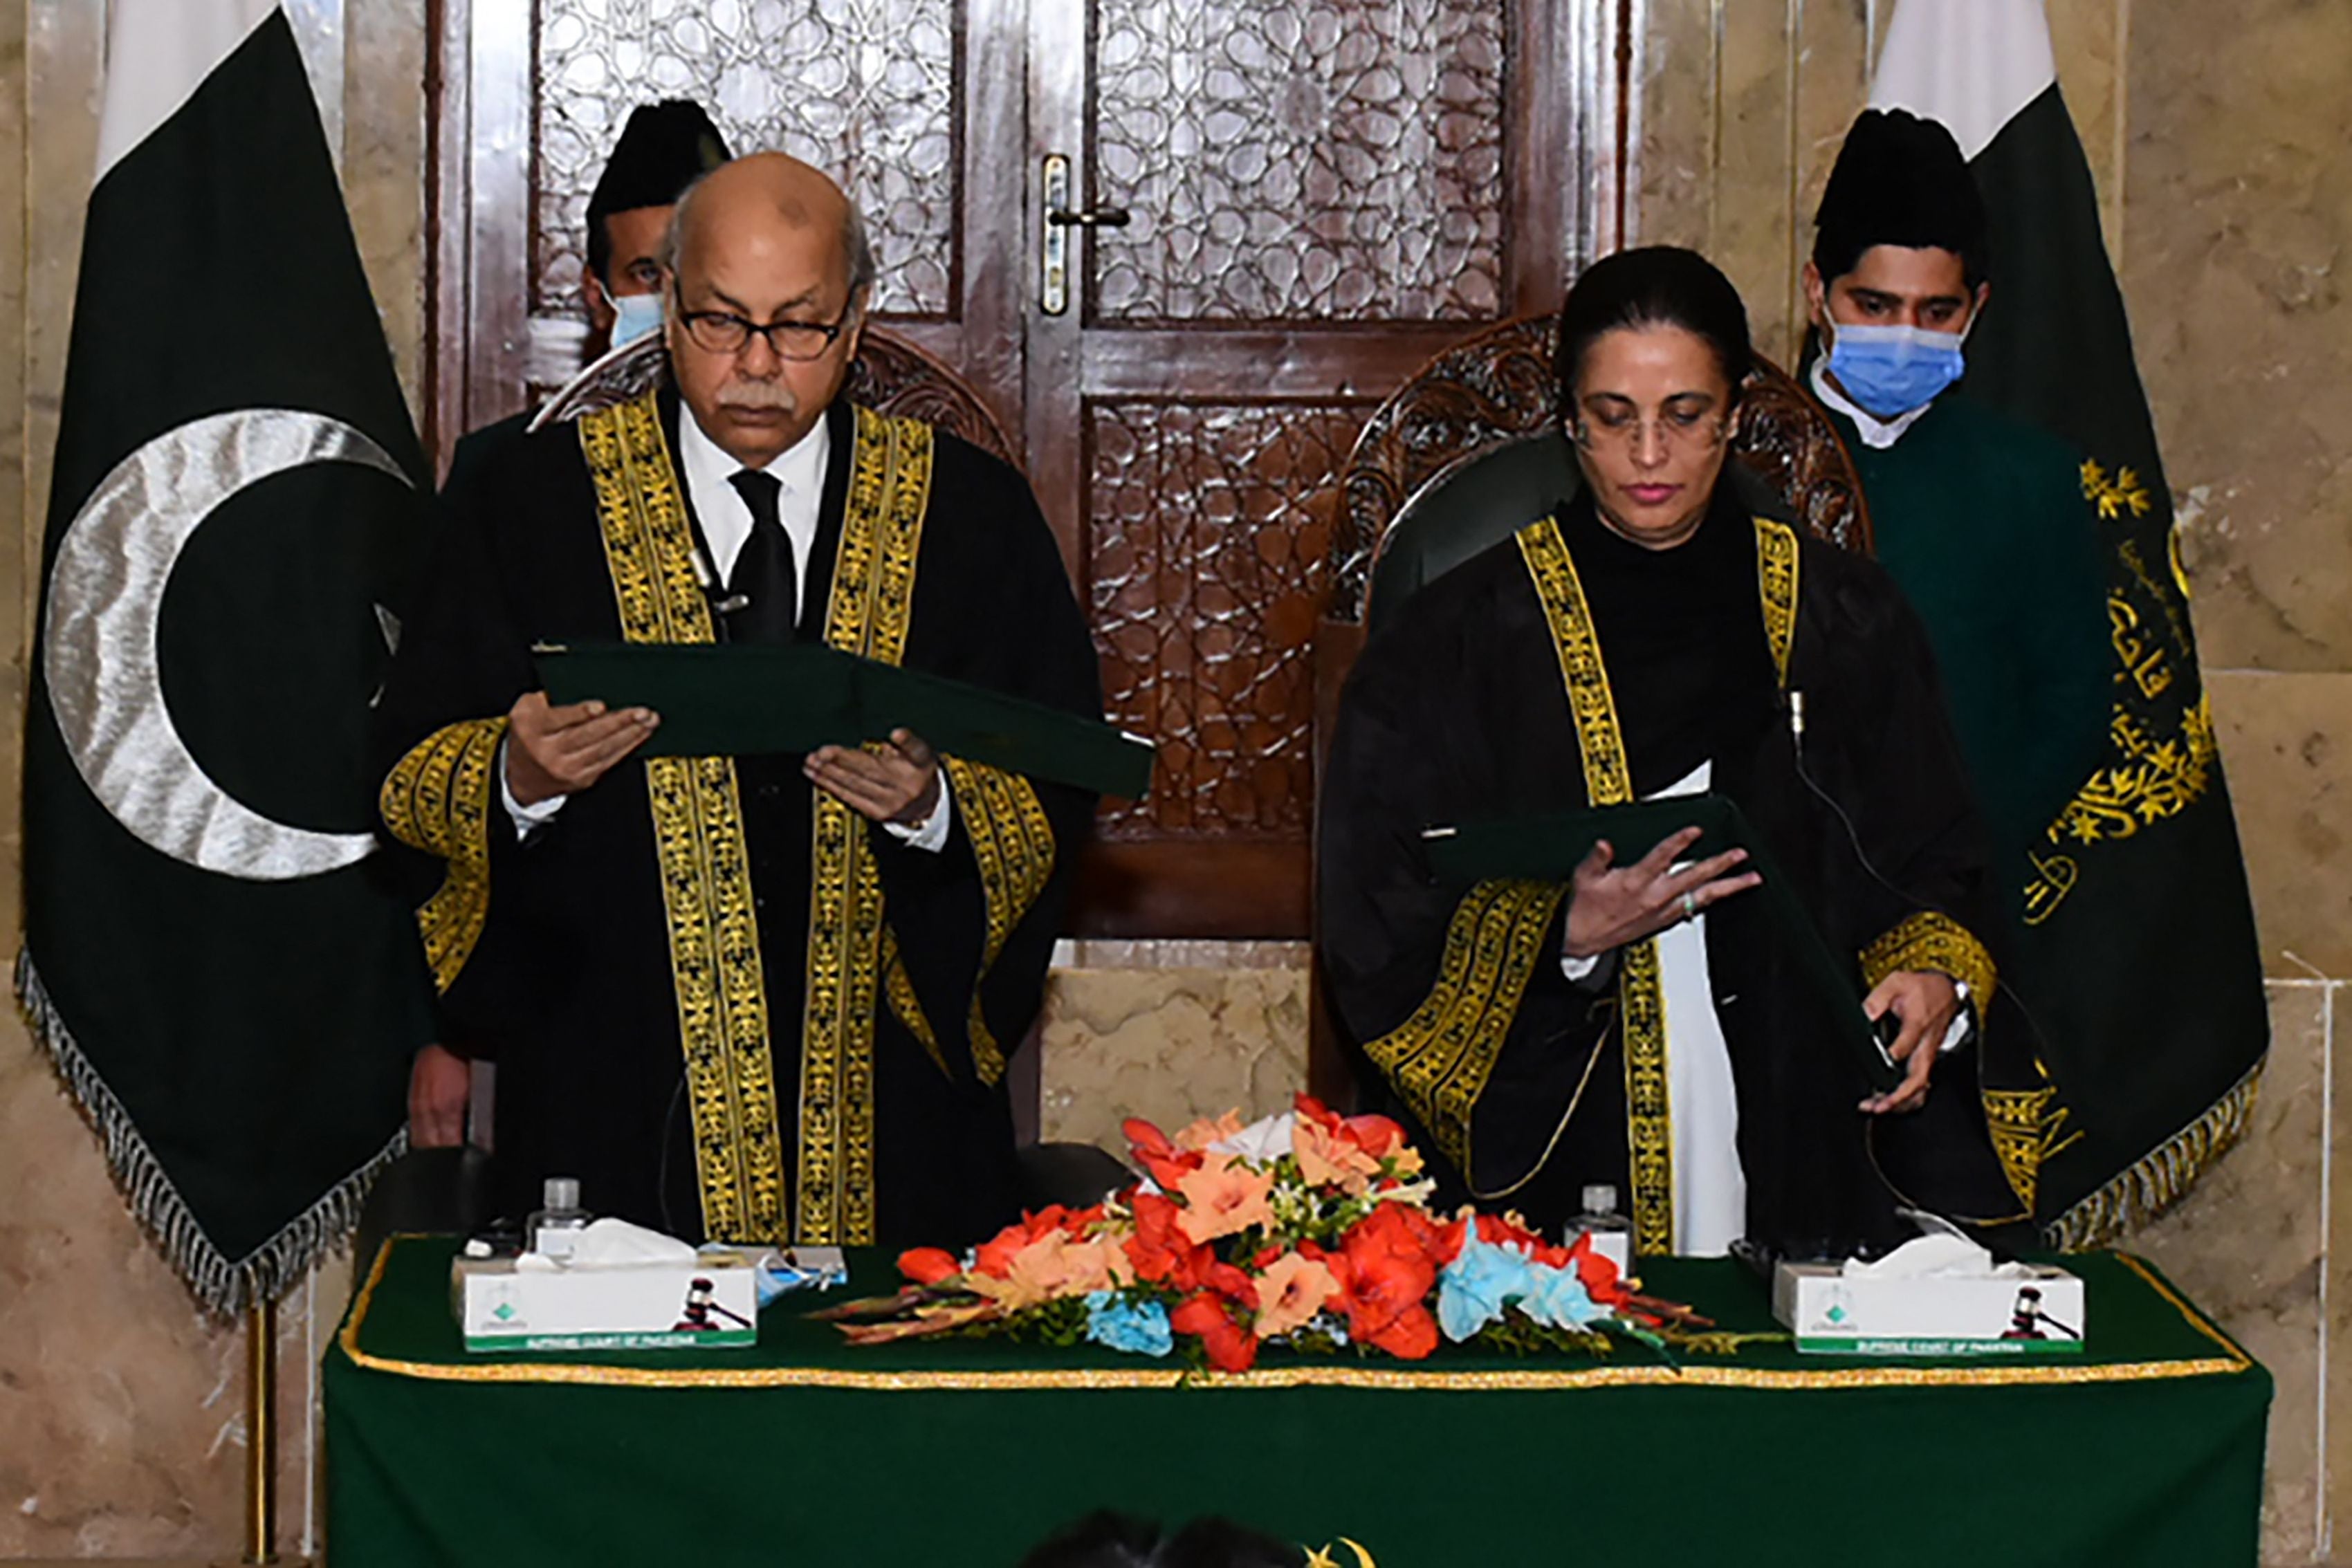 Chief justice Gulzar Ahmed (left) administering the oath to Justice Ayesha Malik as Pakistan's first female Supreme Court judge